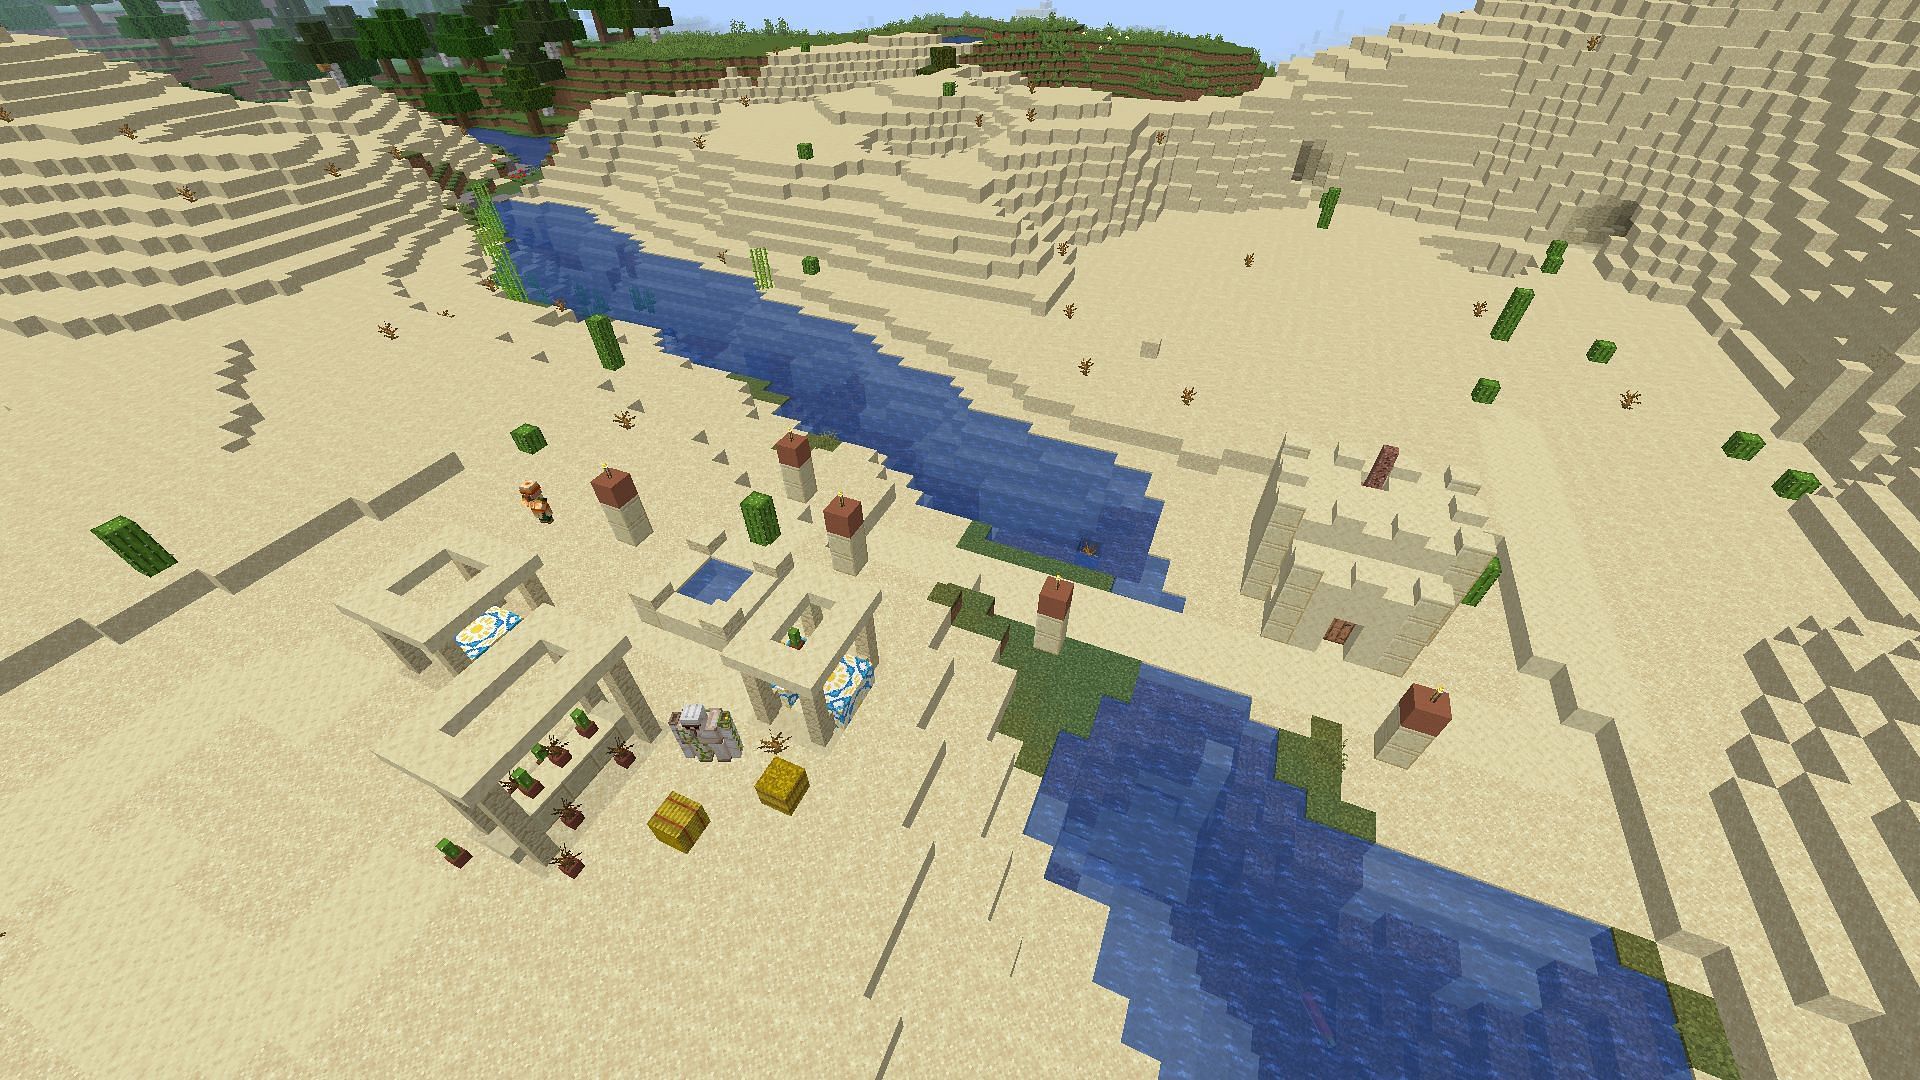 The small desert village that can be found above the stronghold (Image via Minecraft)